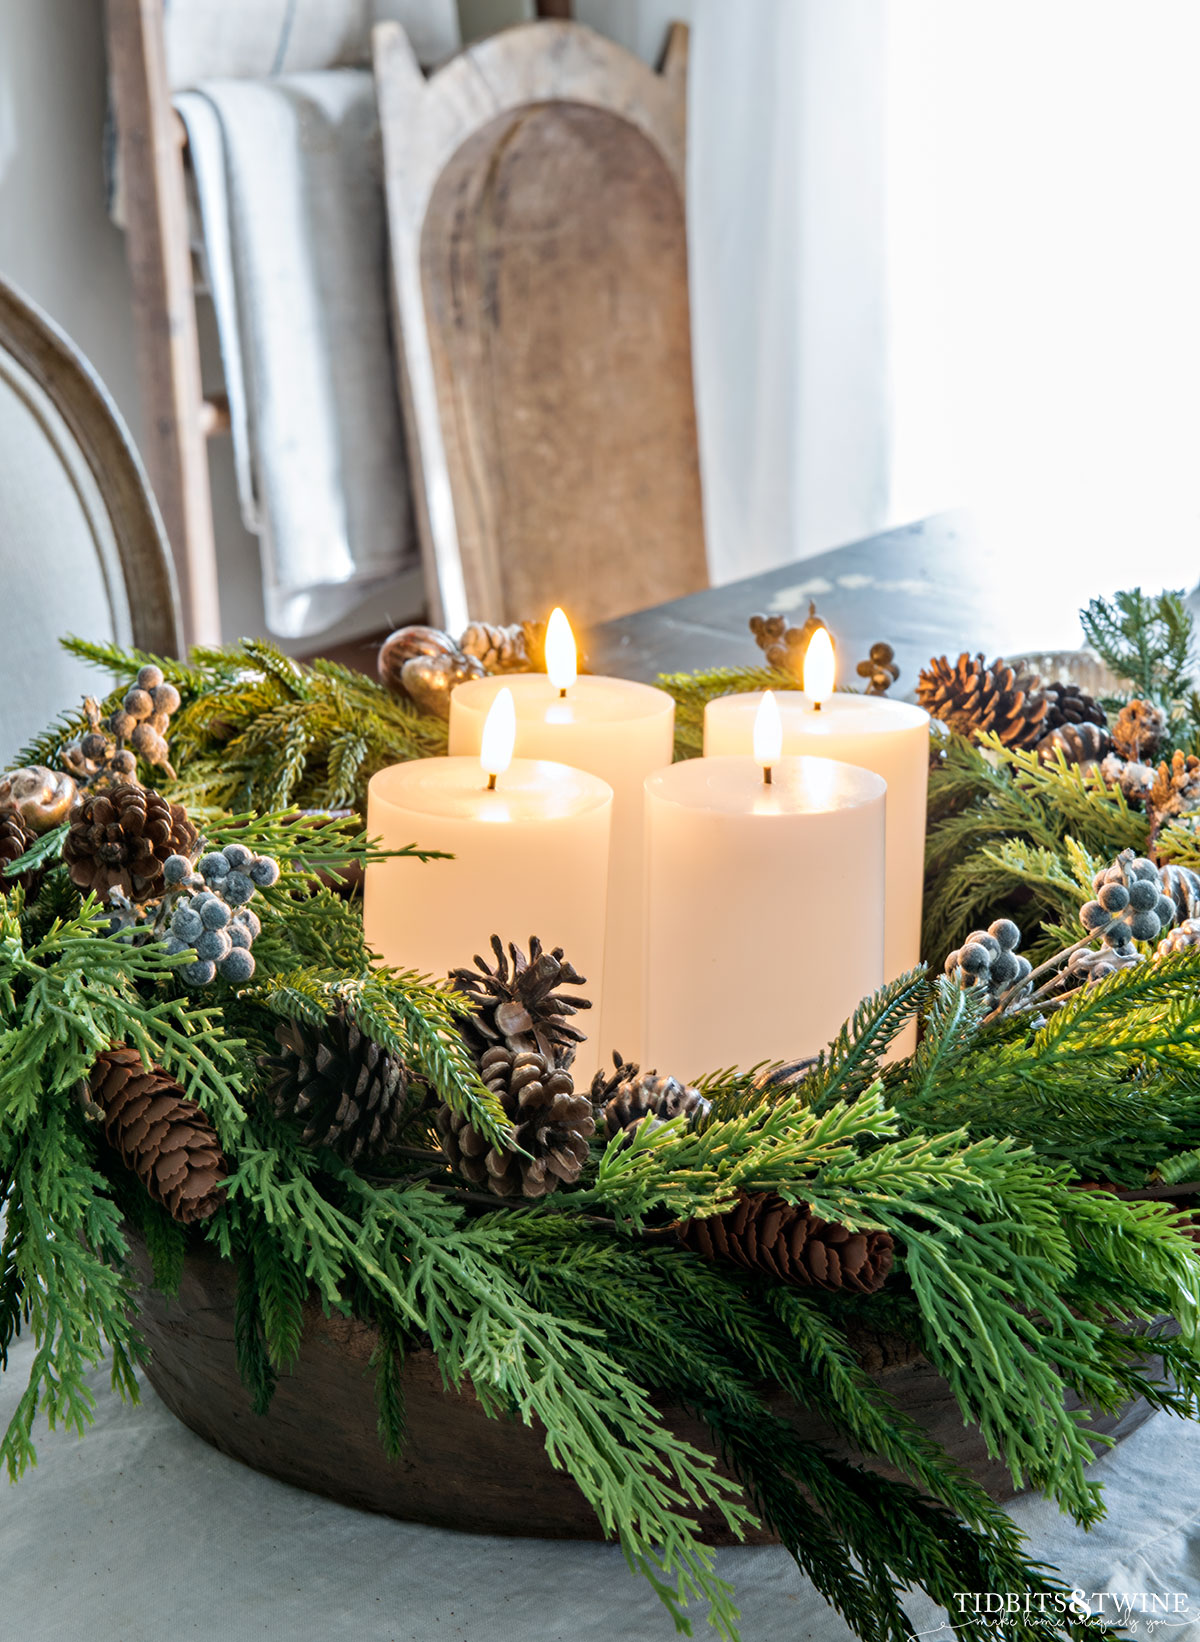 shallow dough bowl with greenery and pinecones and white pillar candles in center